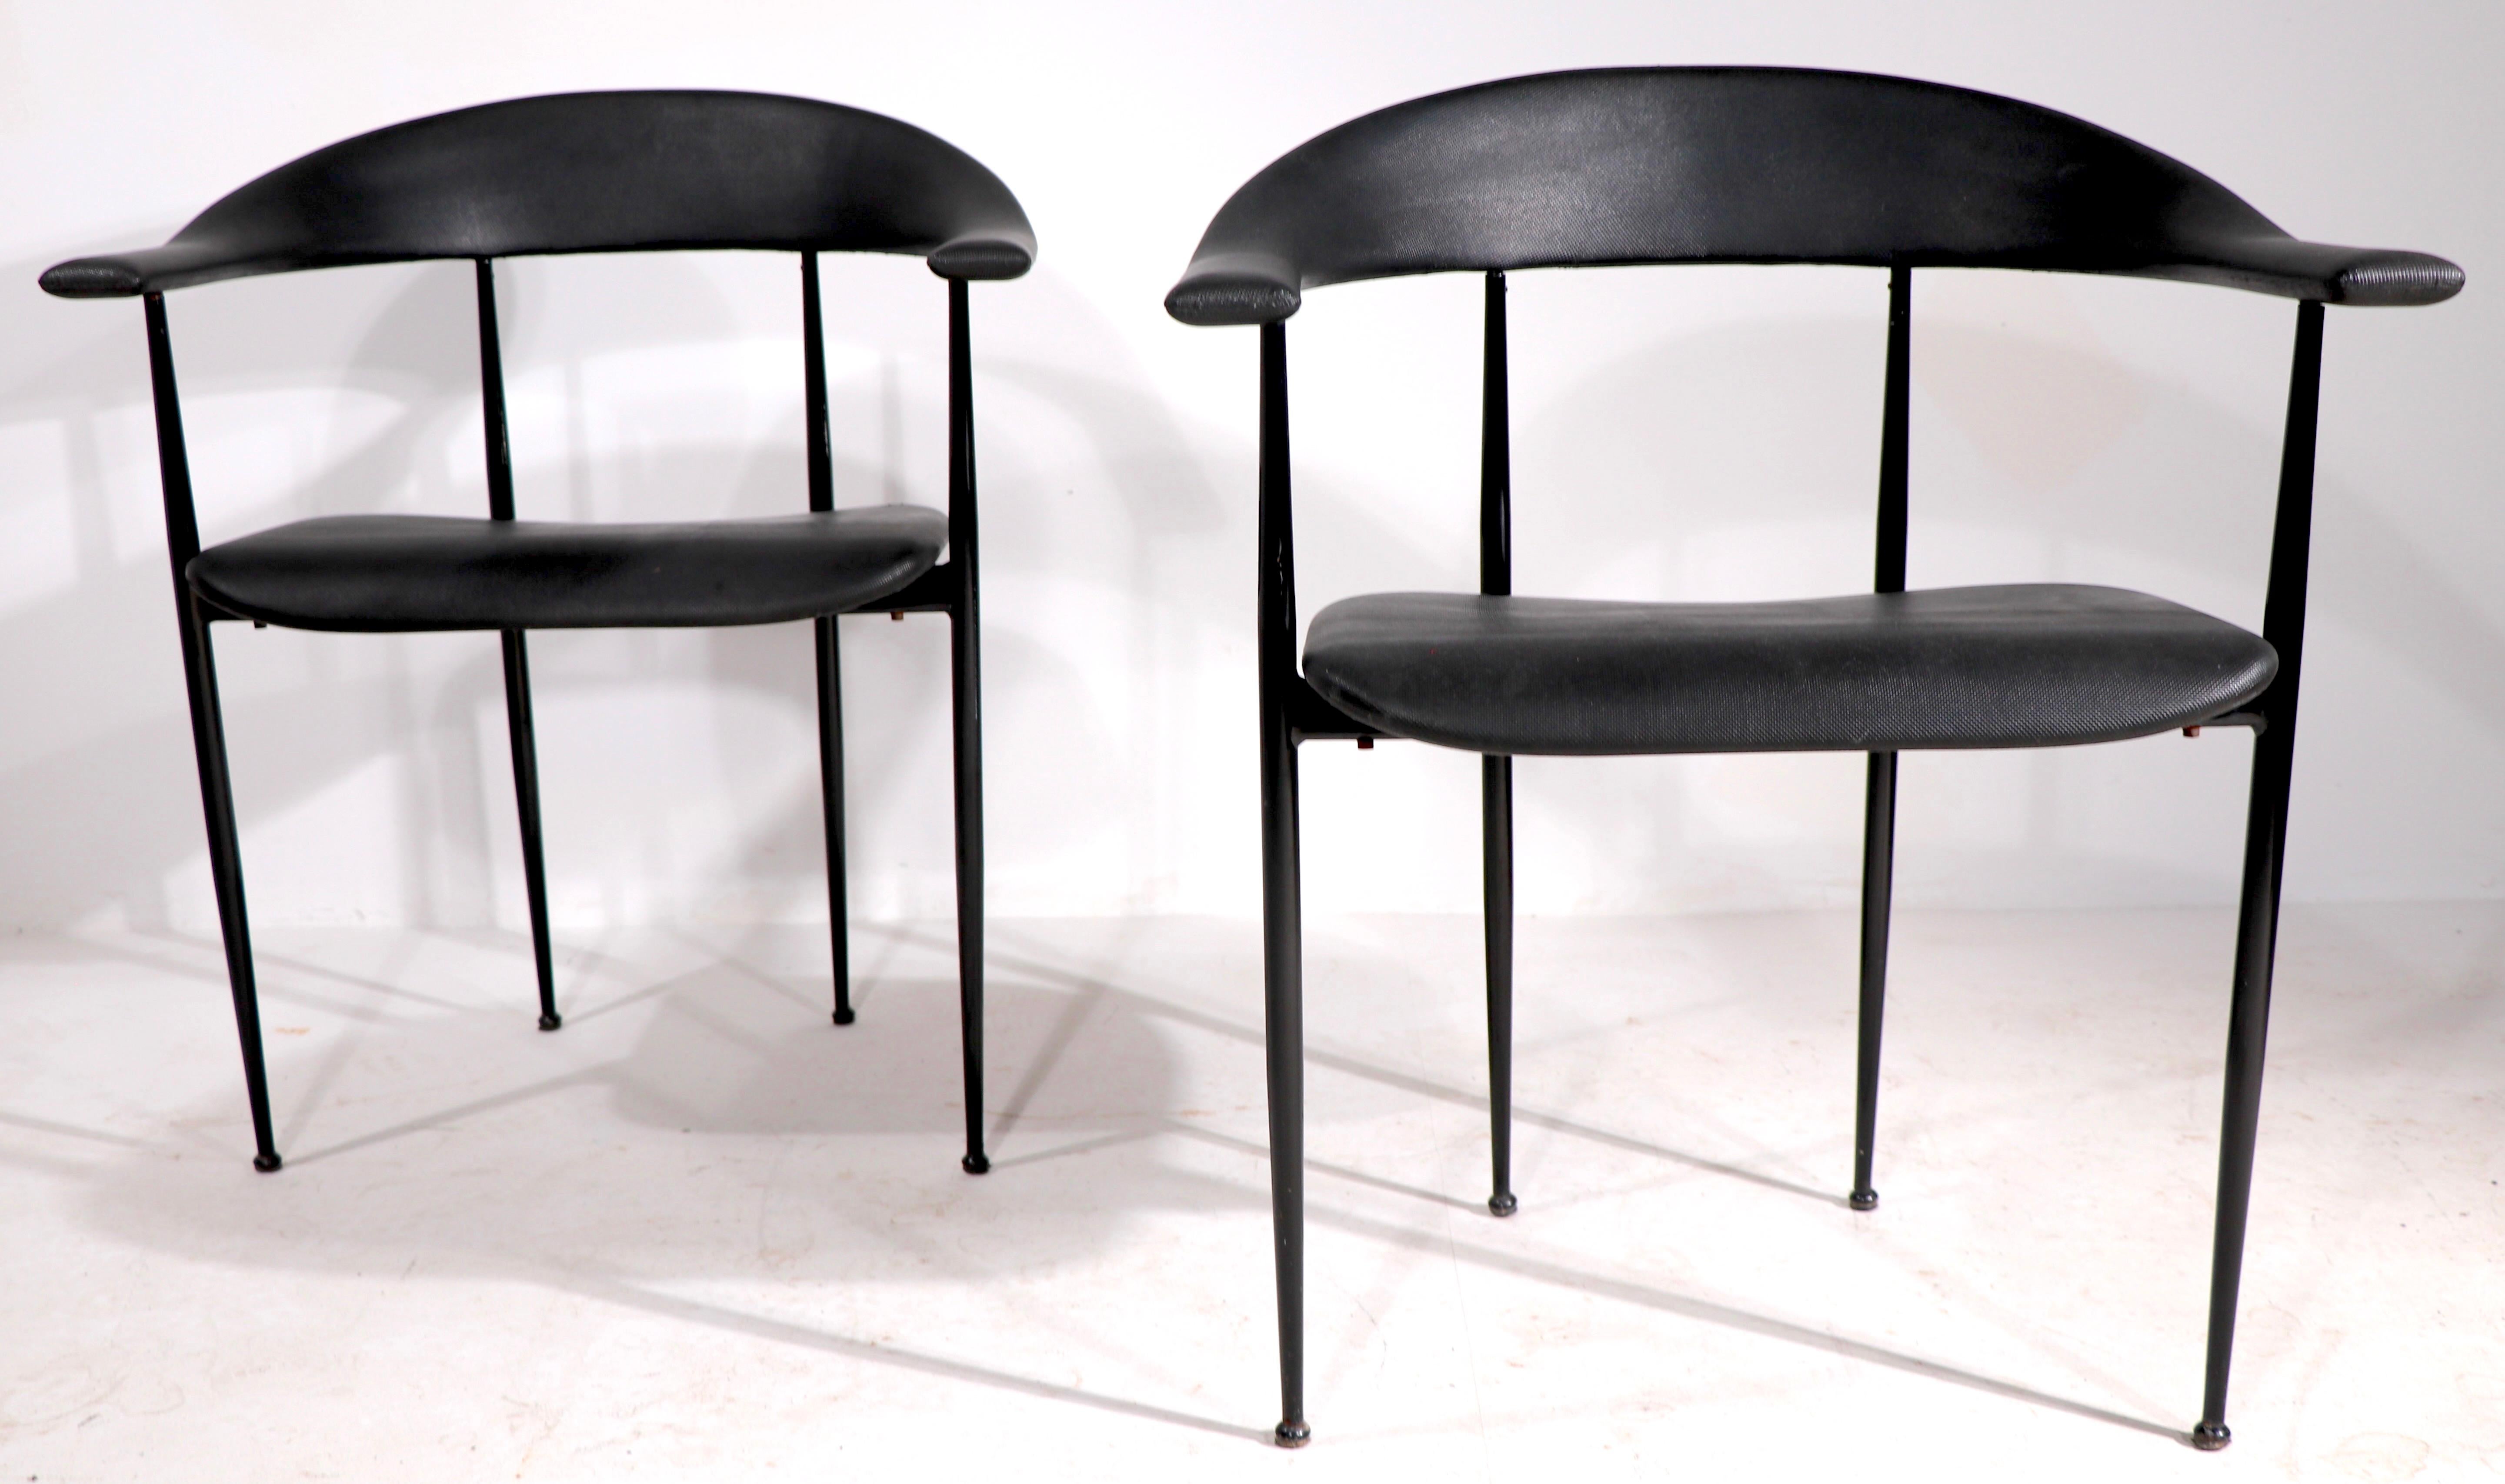 Stylish pair of post modern design chairs, made in Italy, retailed by Conrans Habitat NYC in the 1990's. Very fine, original clean and ready to use condition. Textured rubber upholstery, on slick black metal frames. 
Total H 29.5 x arm H 25 x seat